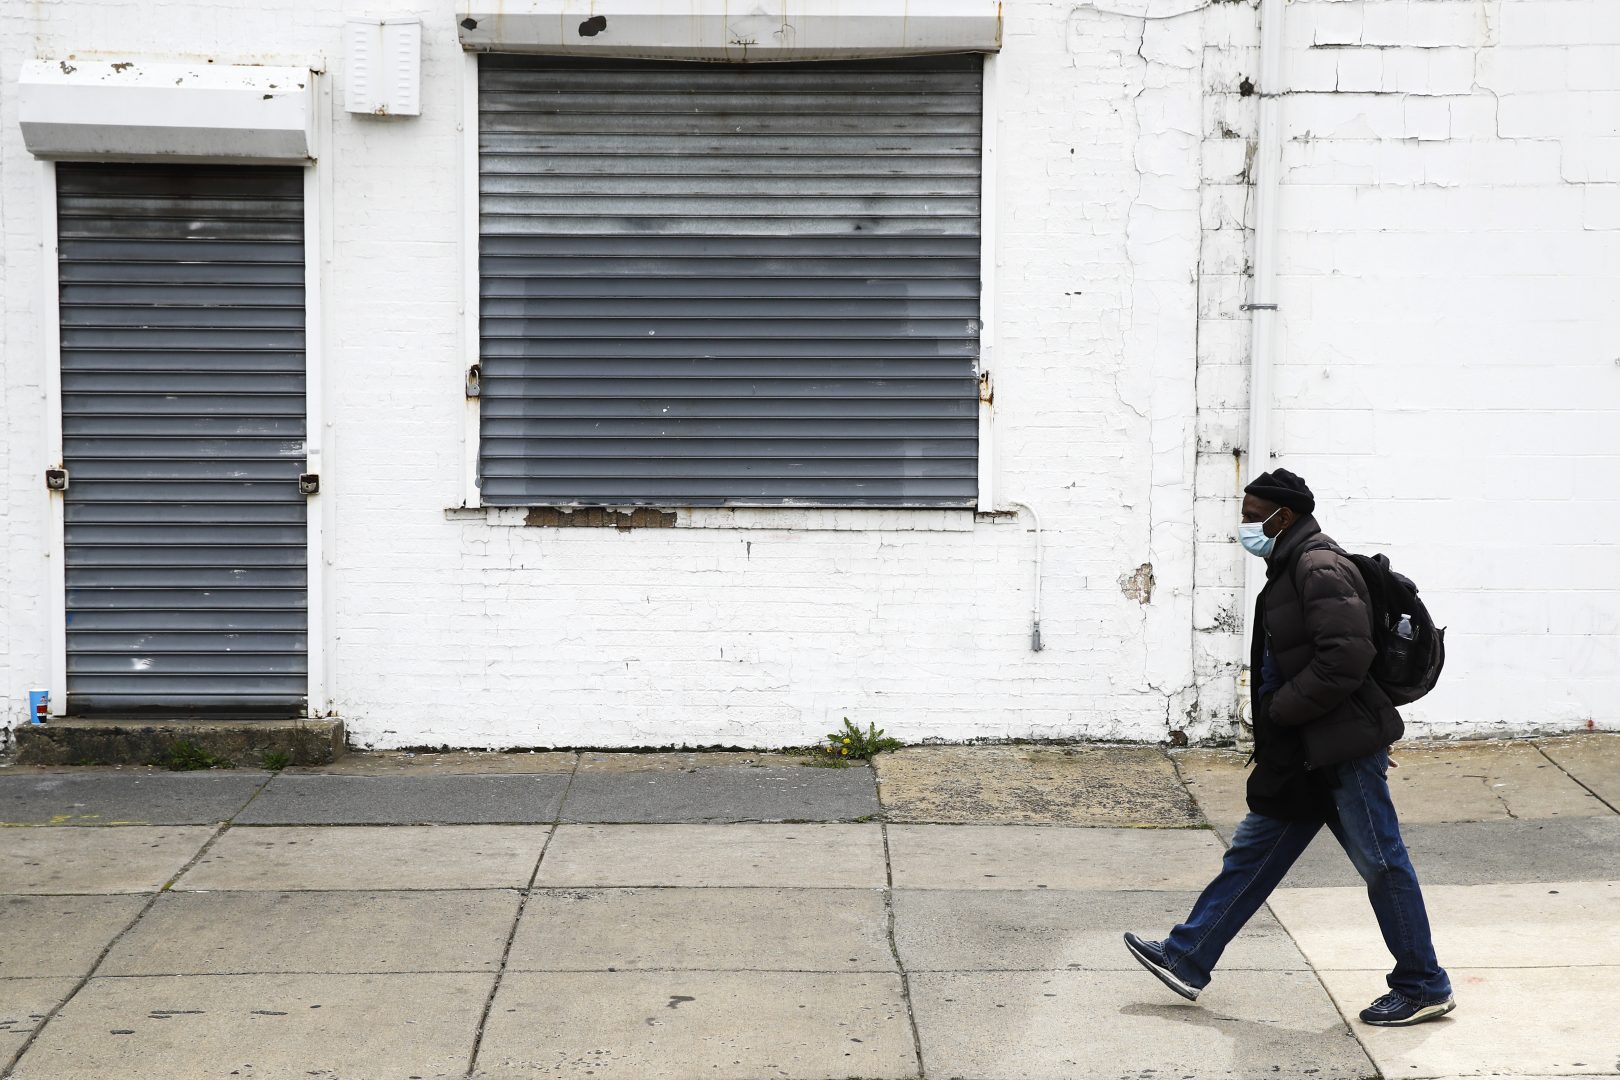 FILE PHOTO: A person walks past a shuttered business in Philadelphia, Thursday, April 23, 2020.